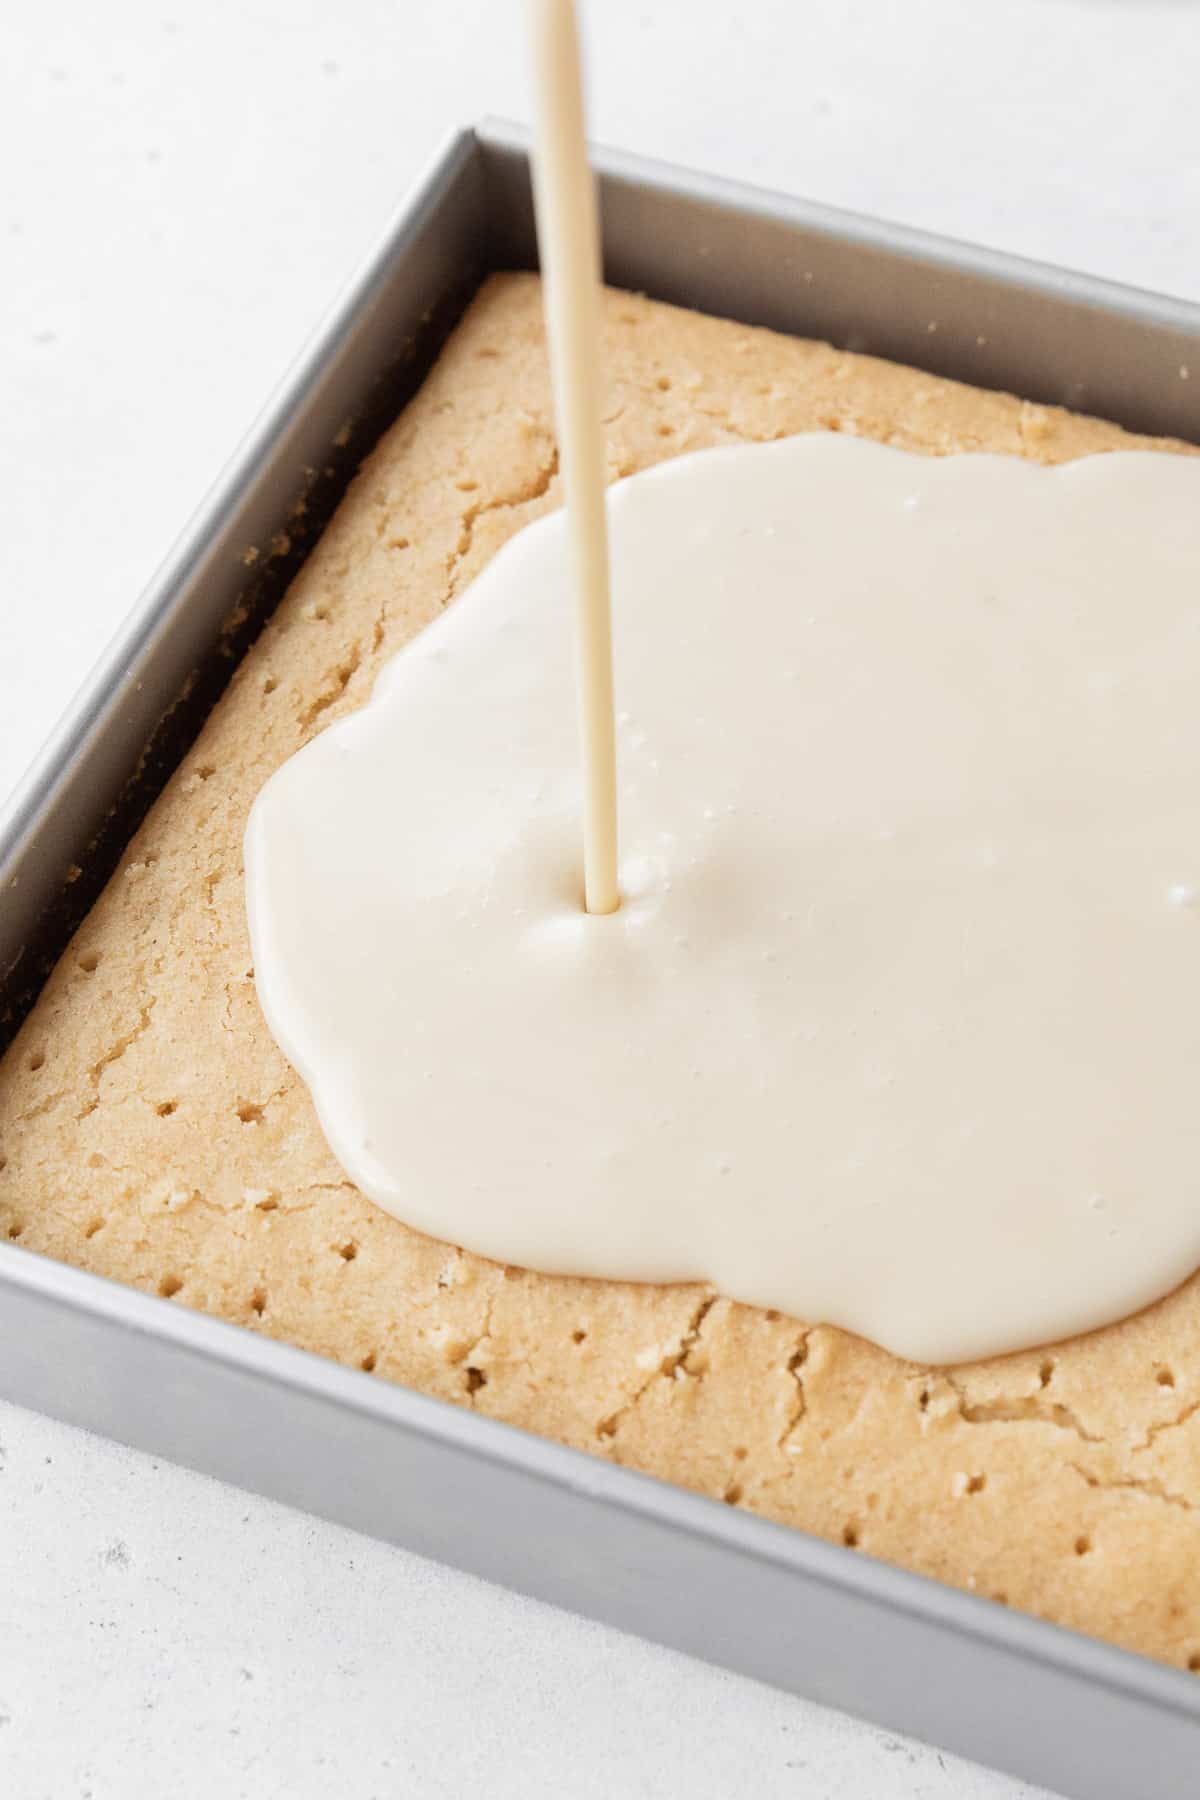 Pouring the dairy-free tres leches milk soak over the cake with poked holes in it.